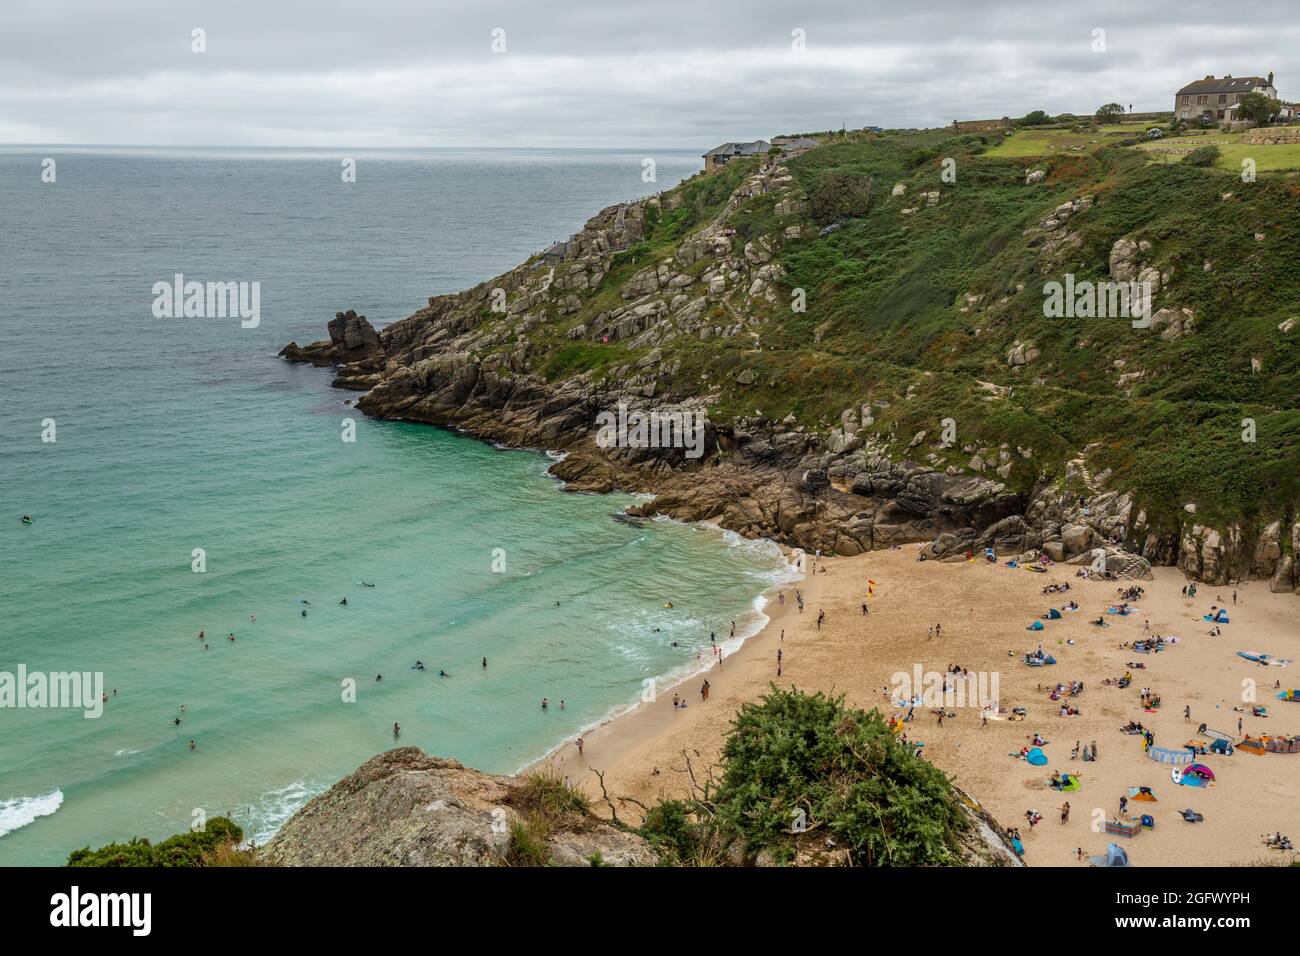 Porthcurno Beach in Cornwall, England, with the Minack Theatre visible on the headland. Stock Photo